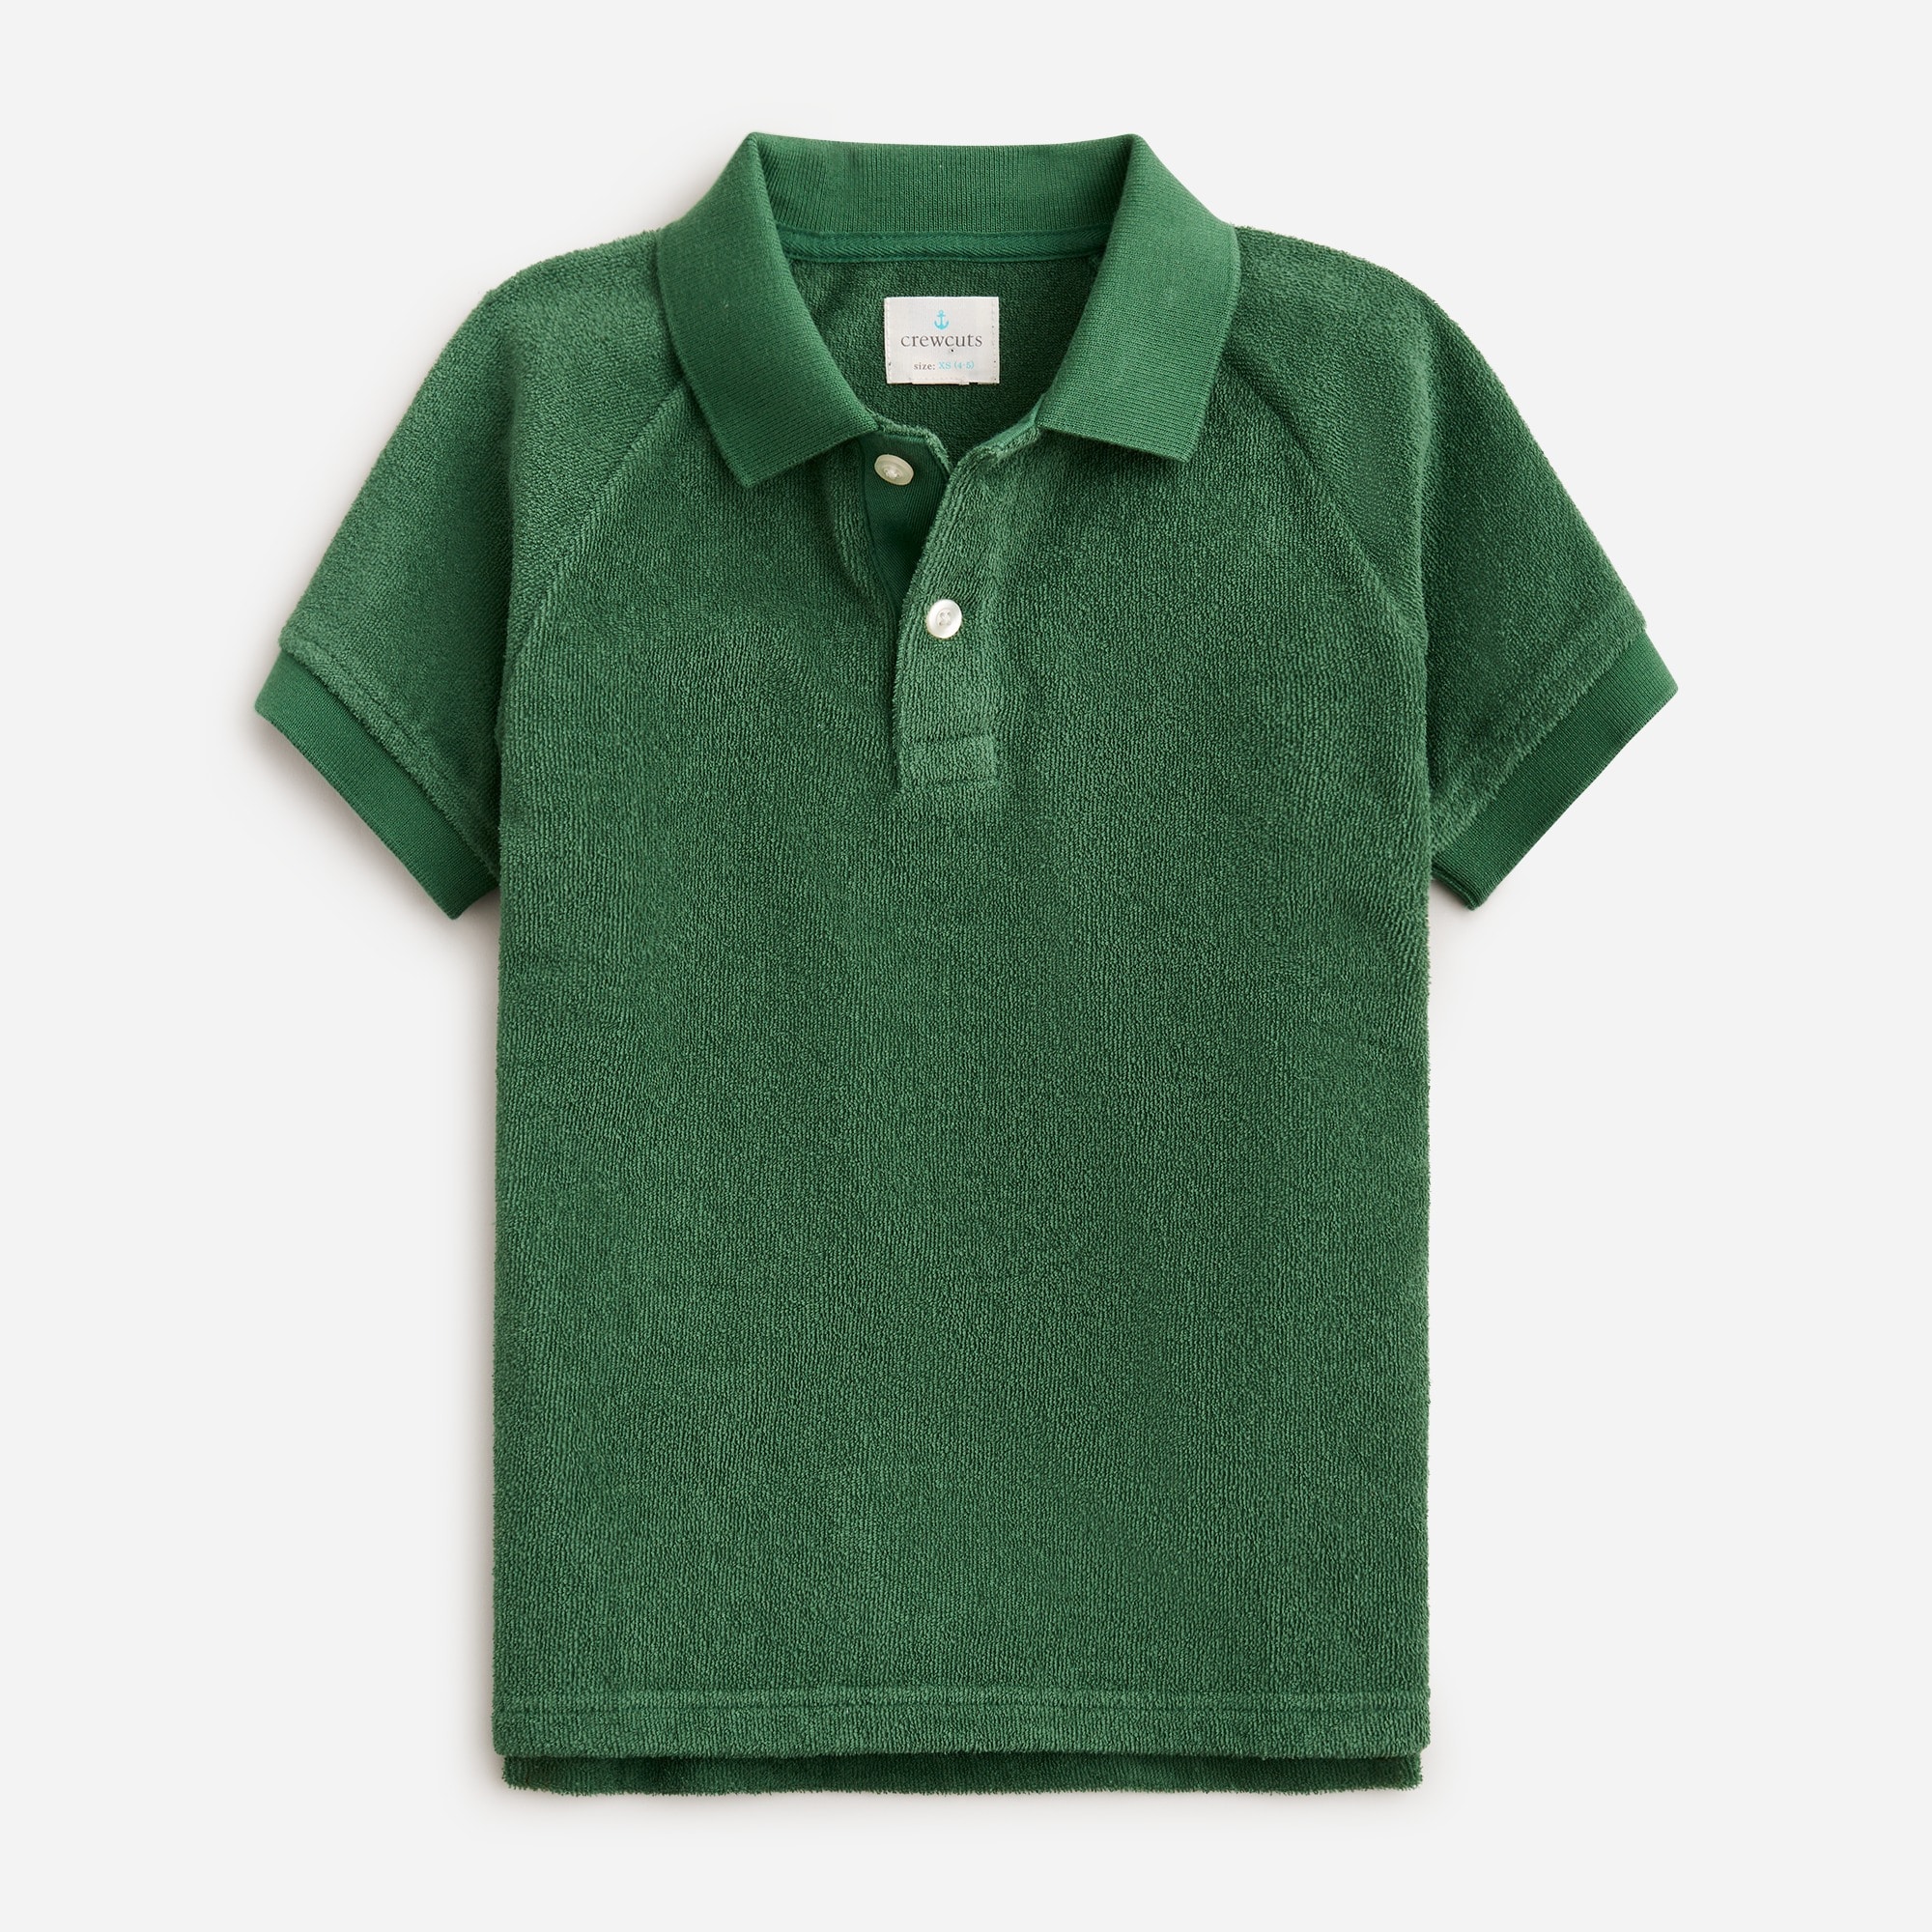  Kids' short-sleeve polo in towel terry